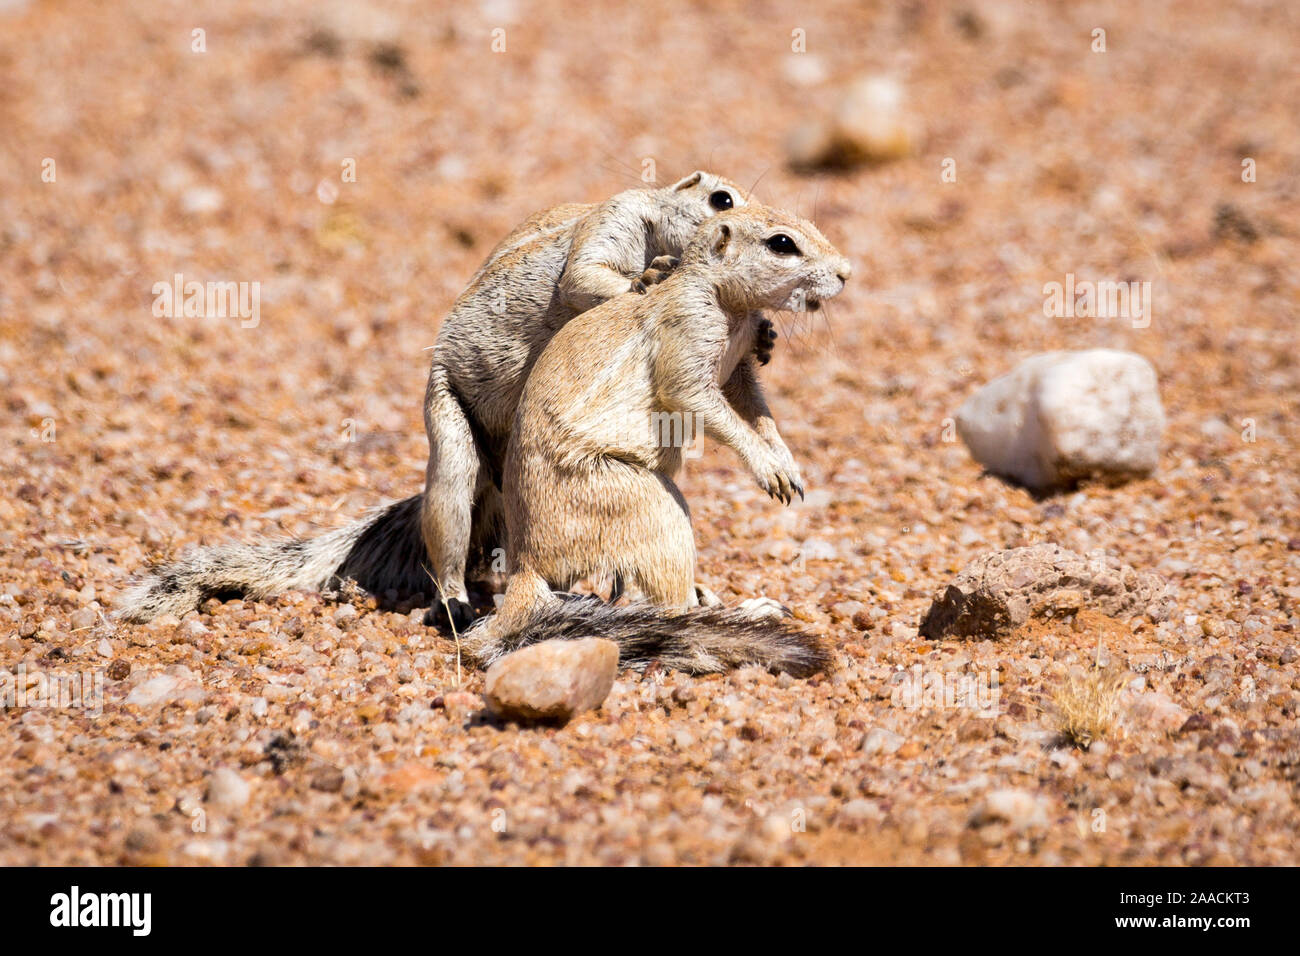 Two ground squirrels showing 'tenderness', Namibia, Africa Stock Photo